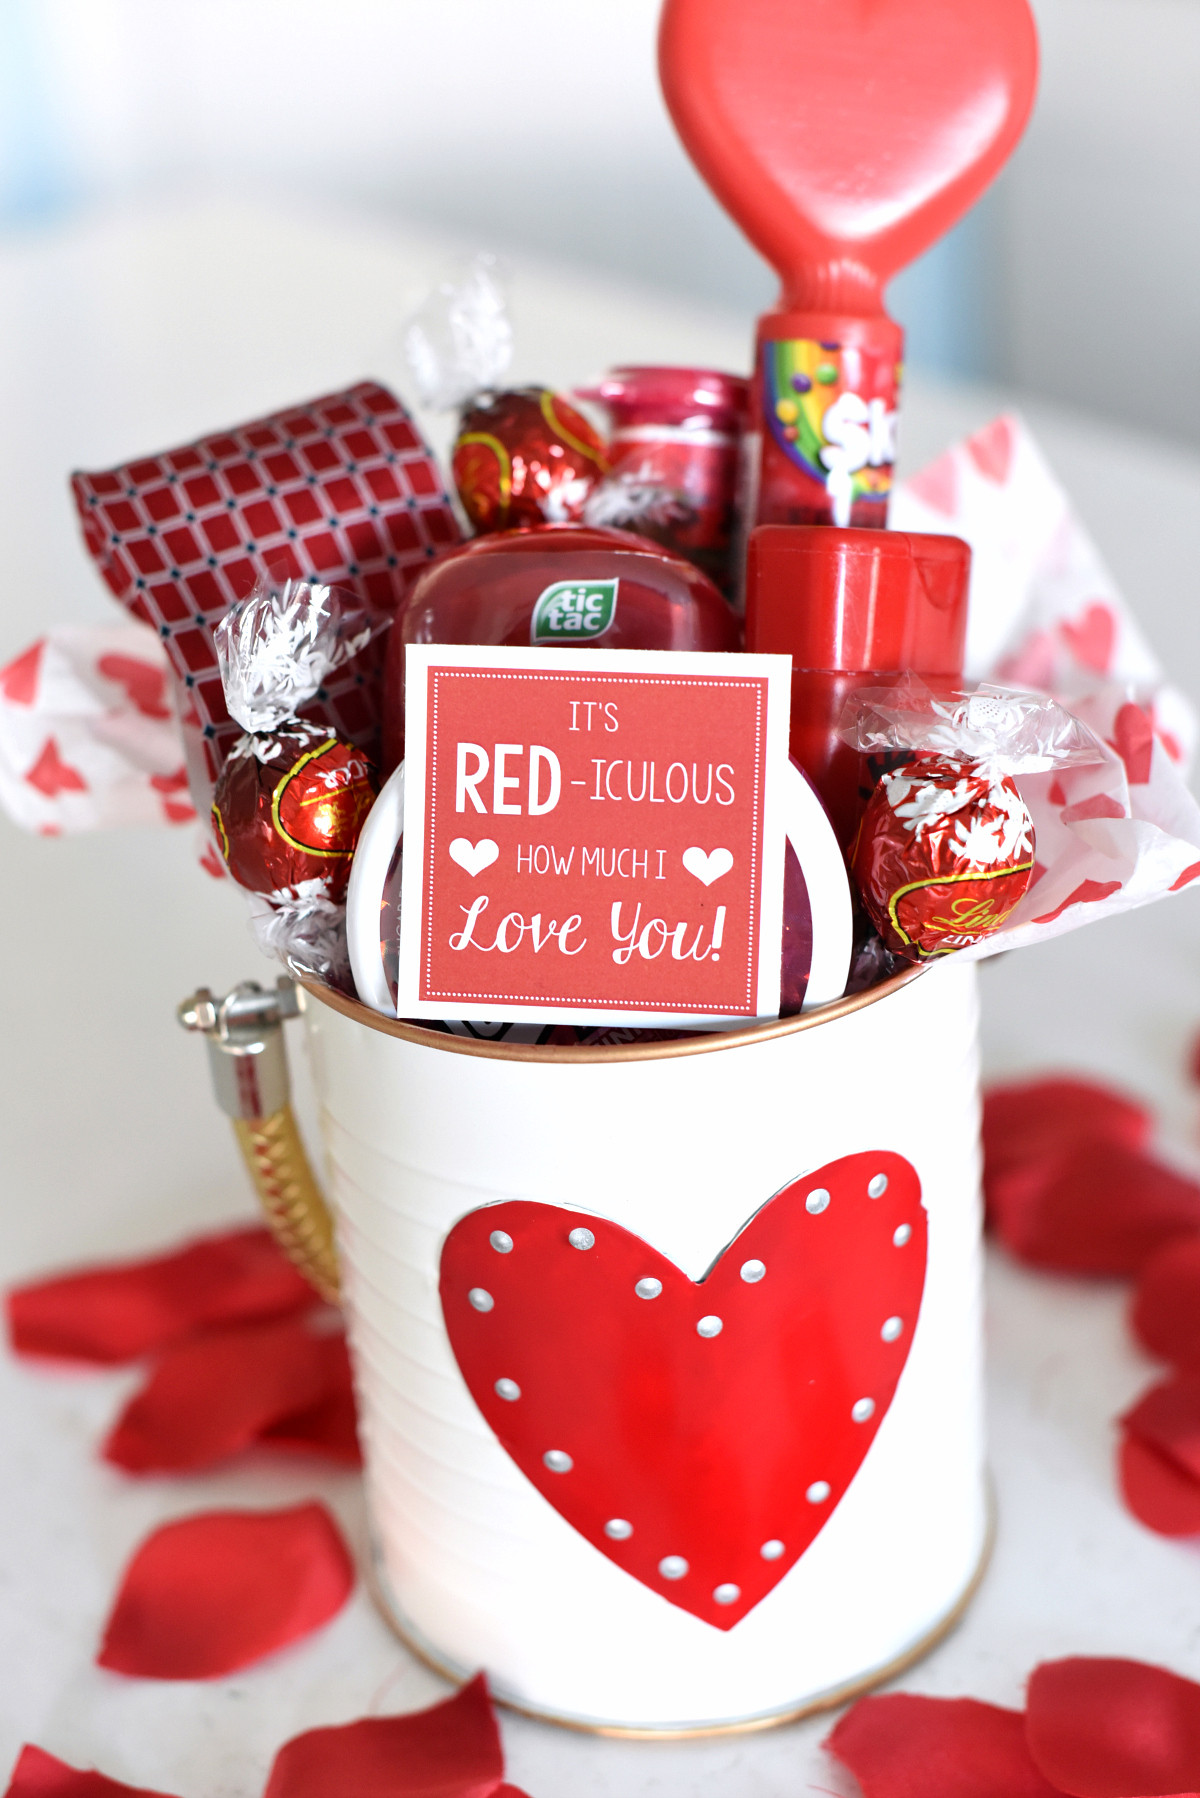 Valentine Gift Ideas For Husband Homemade
 Cute Valentine s Day Gift Idea RED iculous Basket